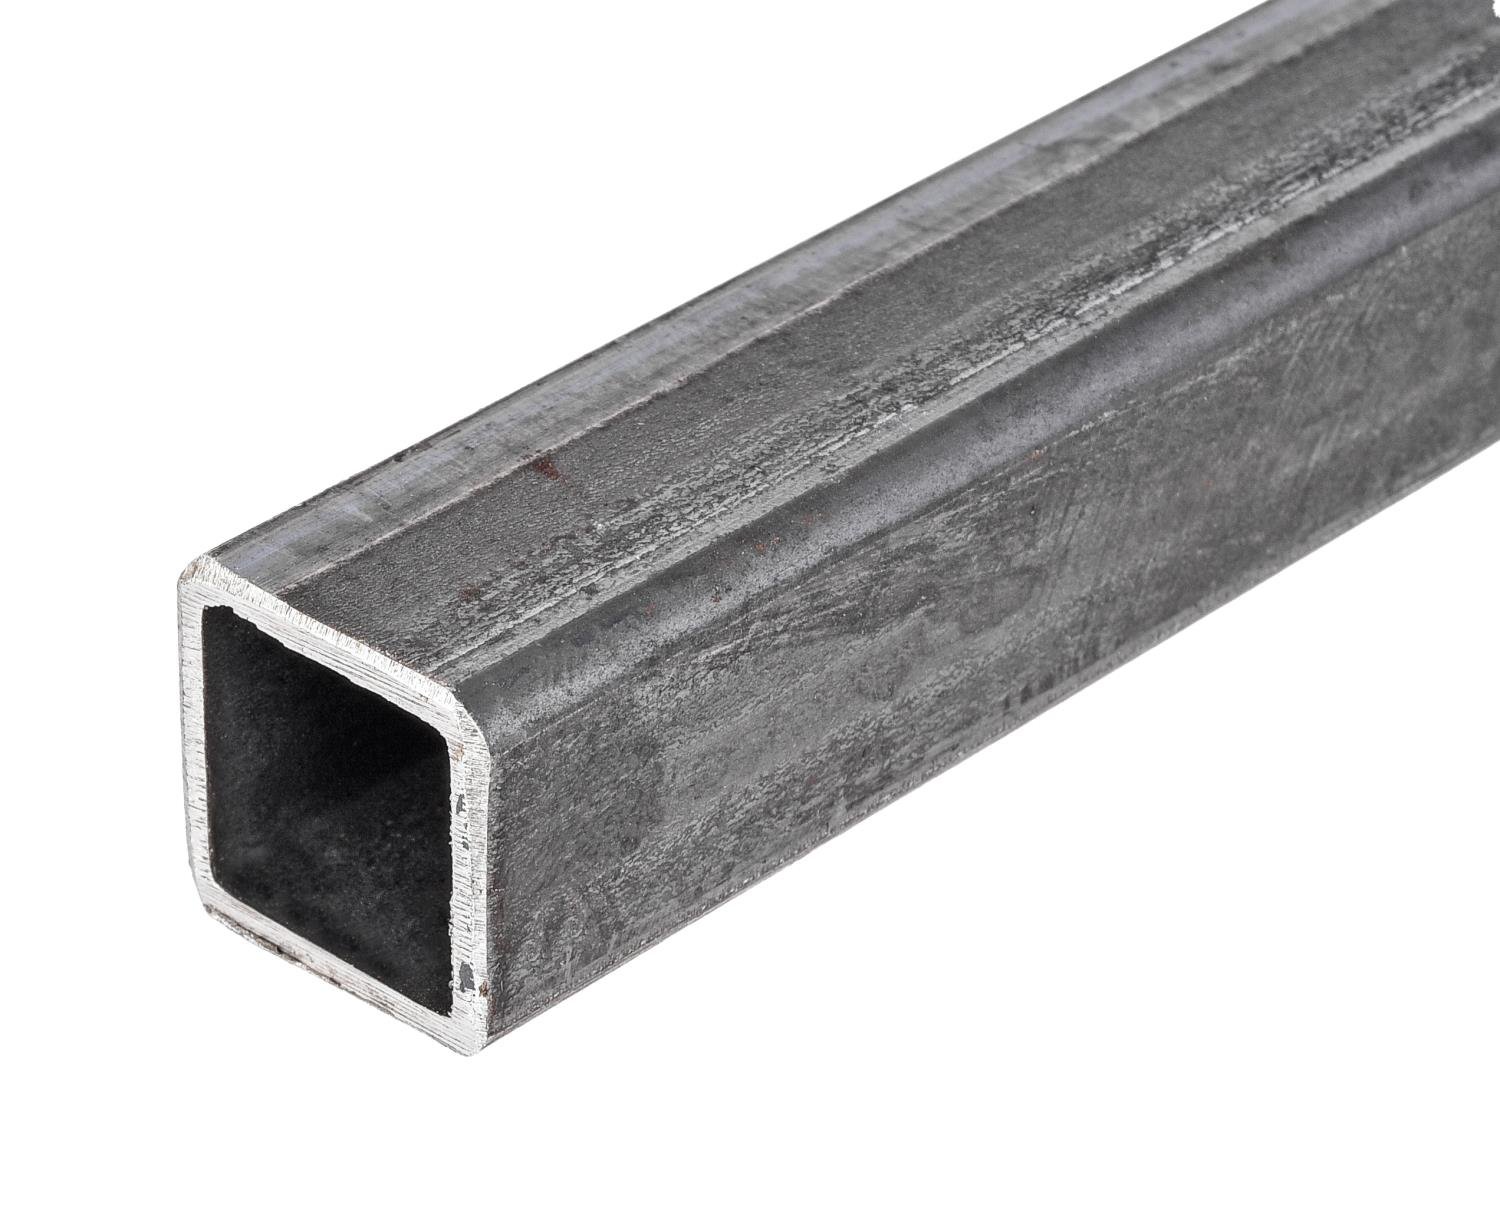 Mild Steel Tubing [Square, 3/4 in. Width x 0.065 in. Thickness x 8 ft. Length]